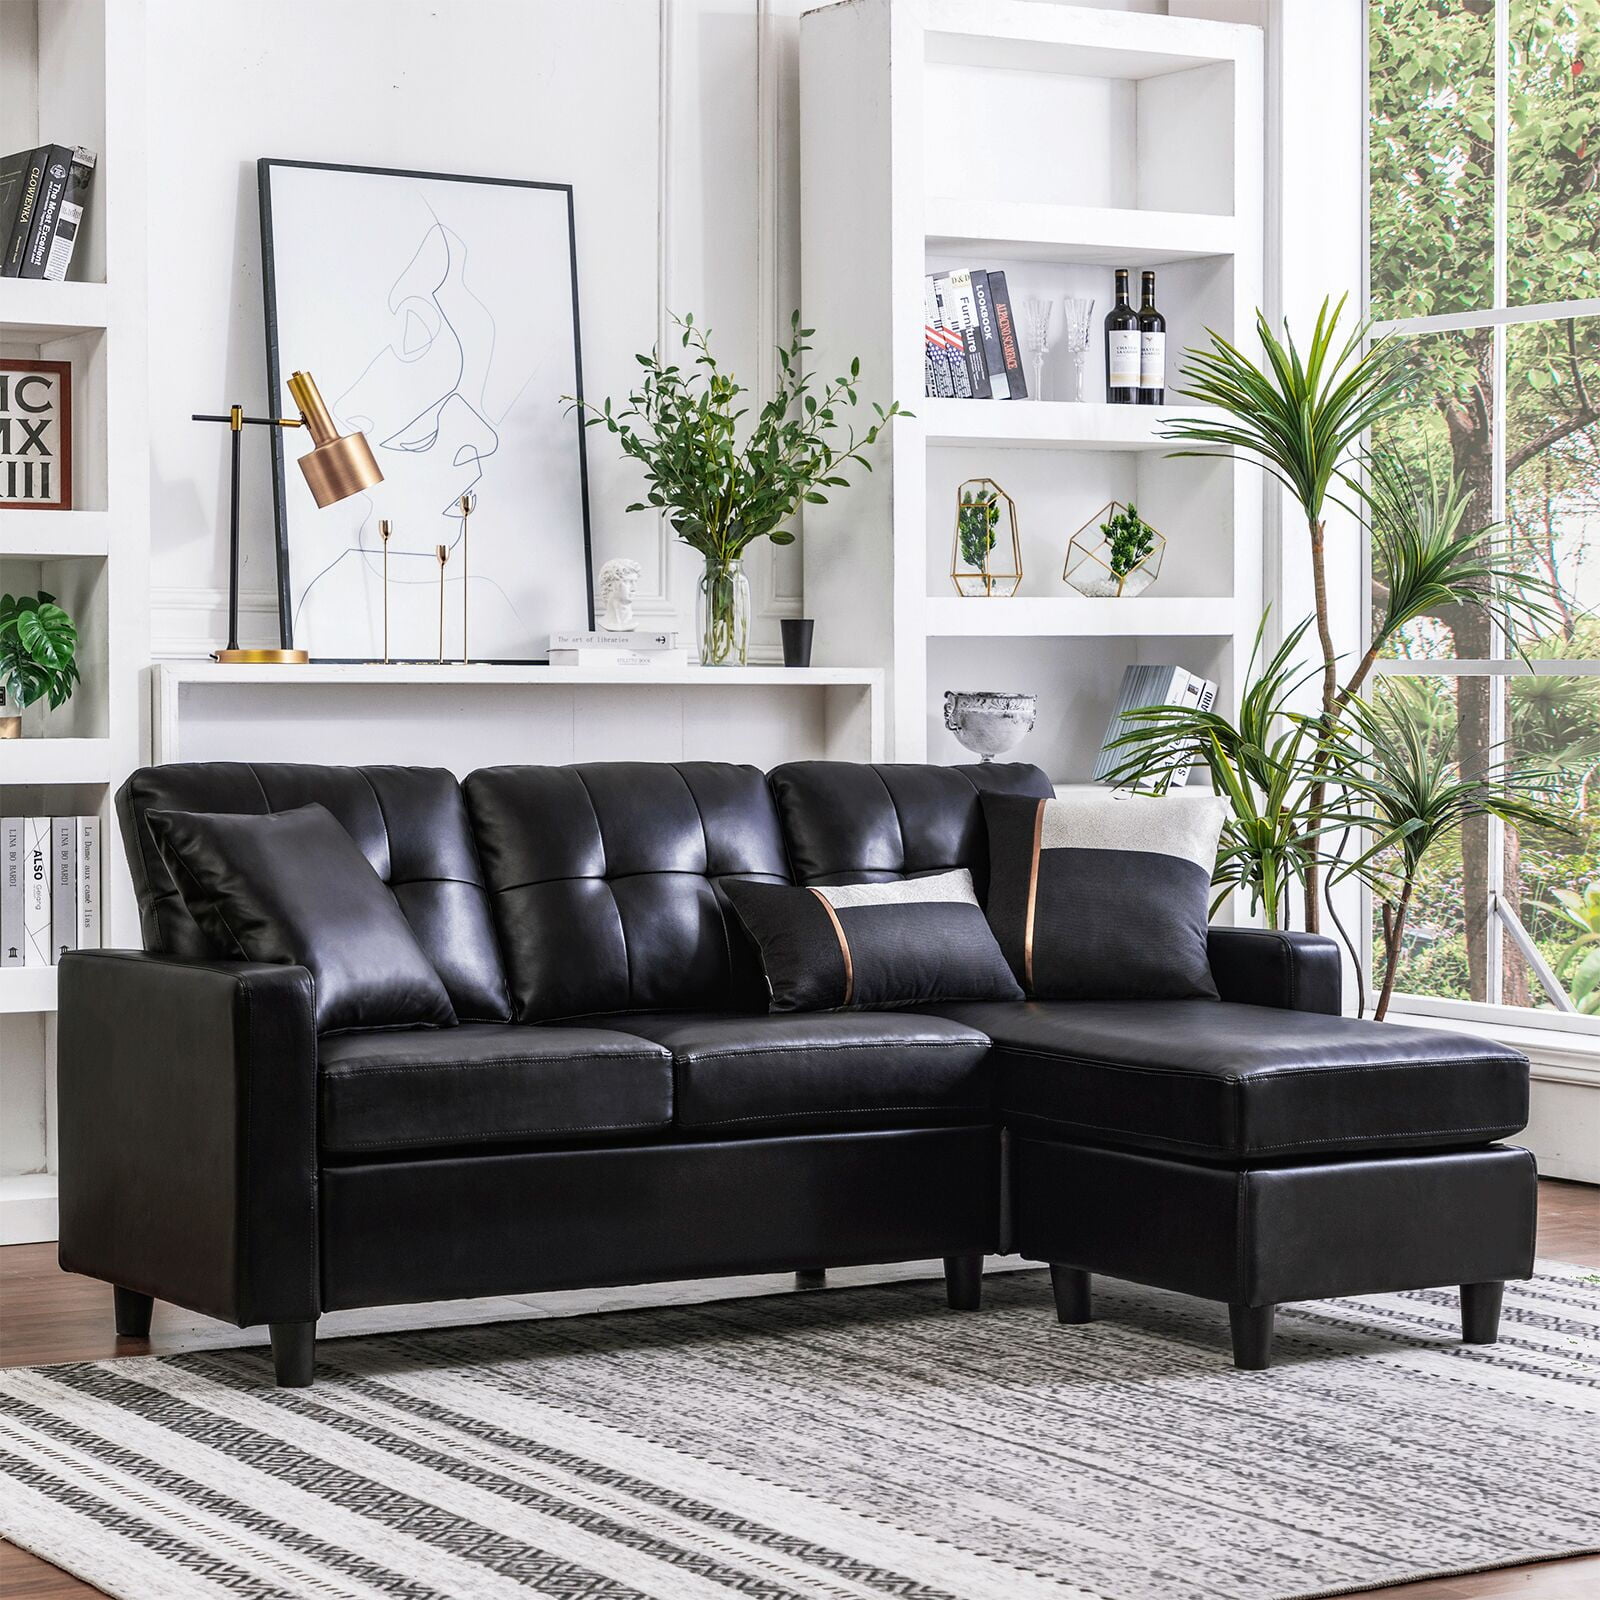 Honbay Faux Leather Sectional Sofa L, L Shaped Black Leather Couch